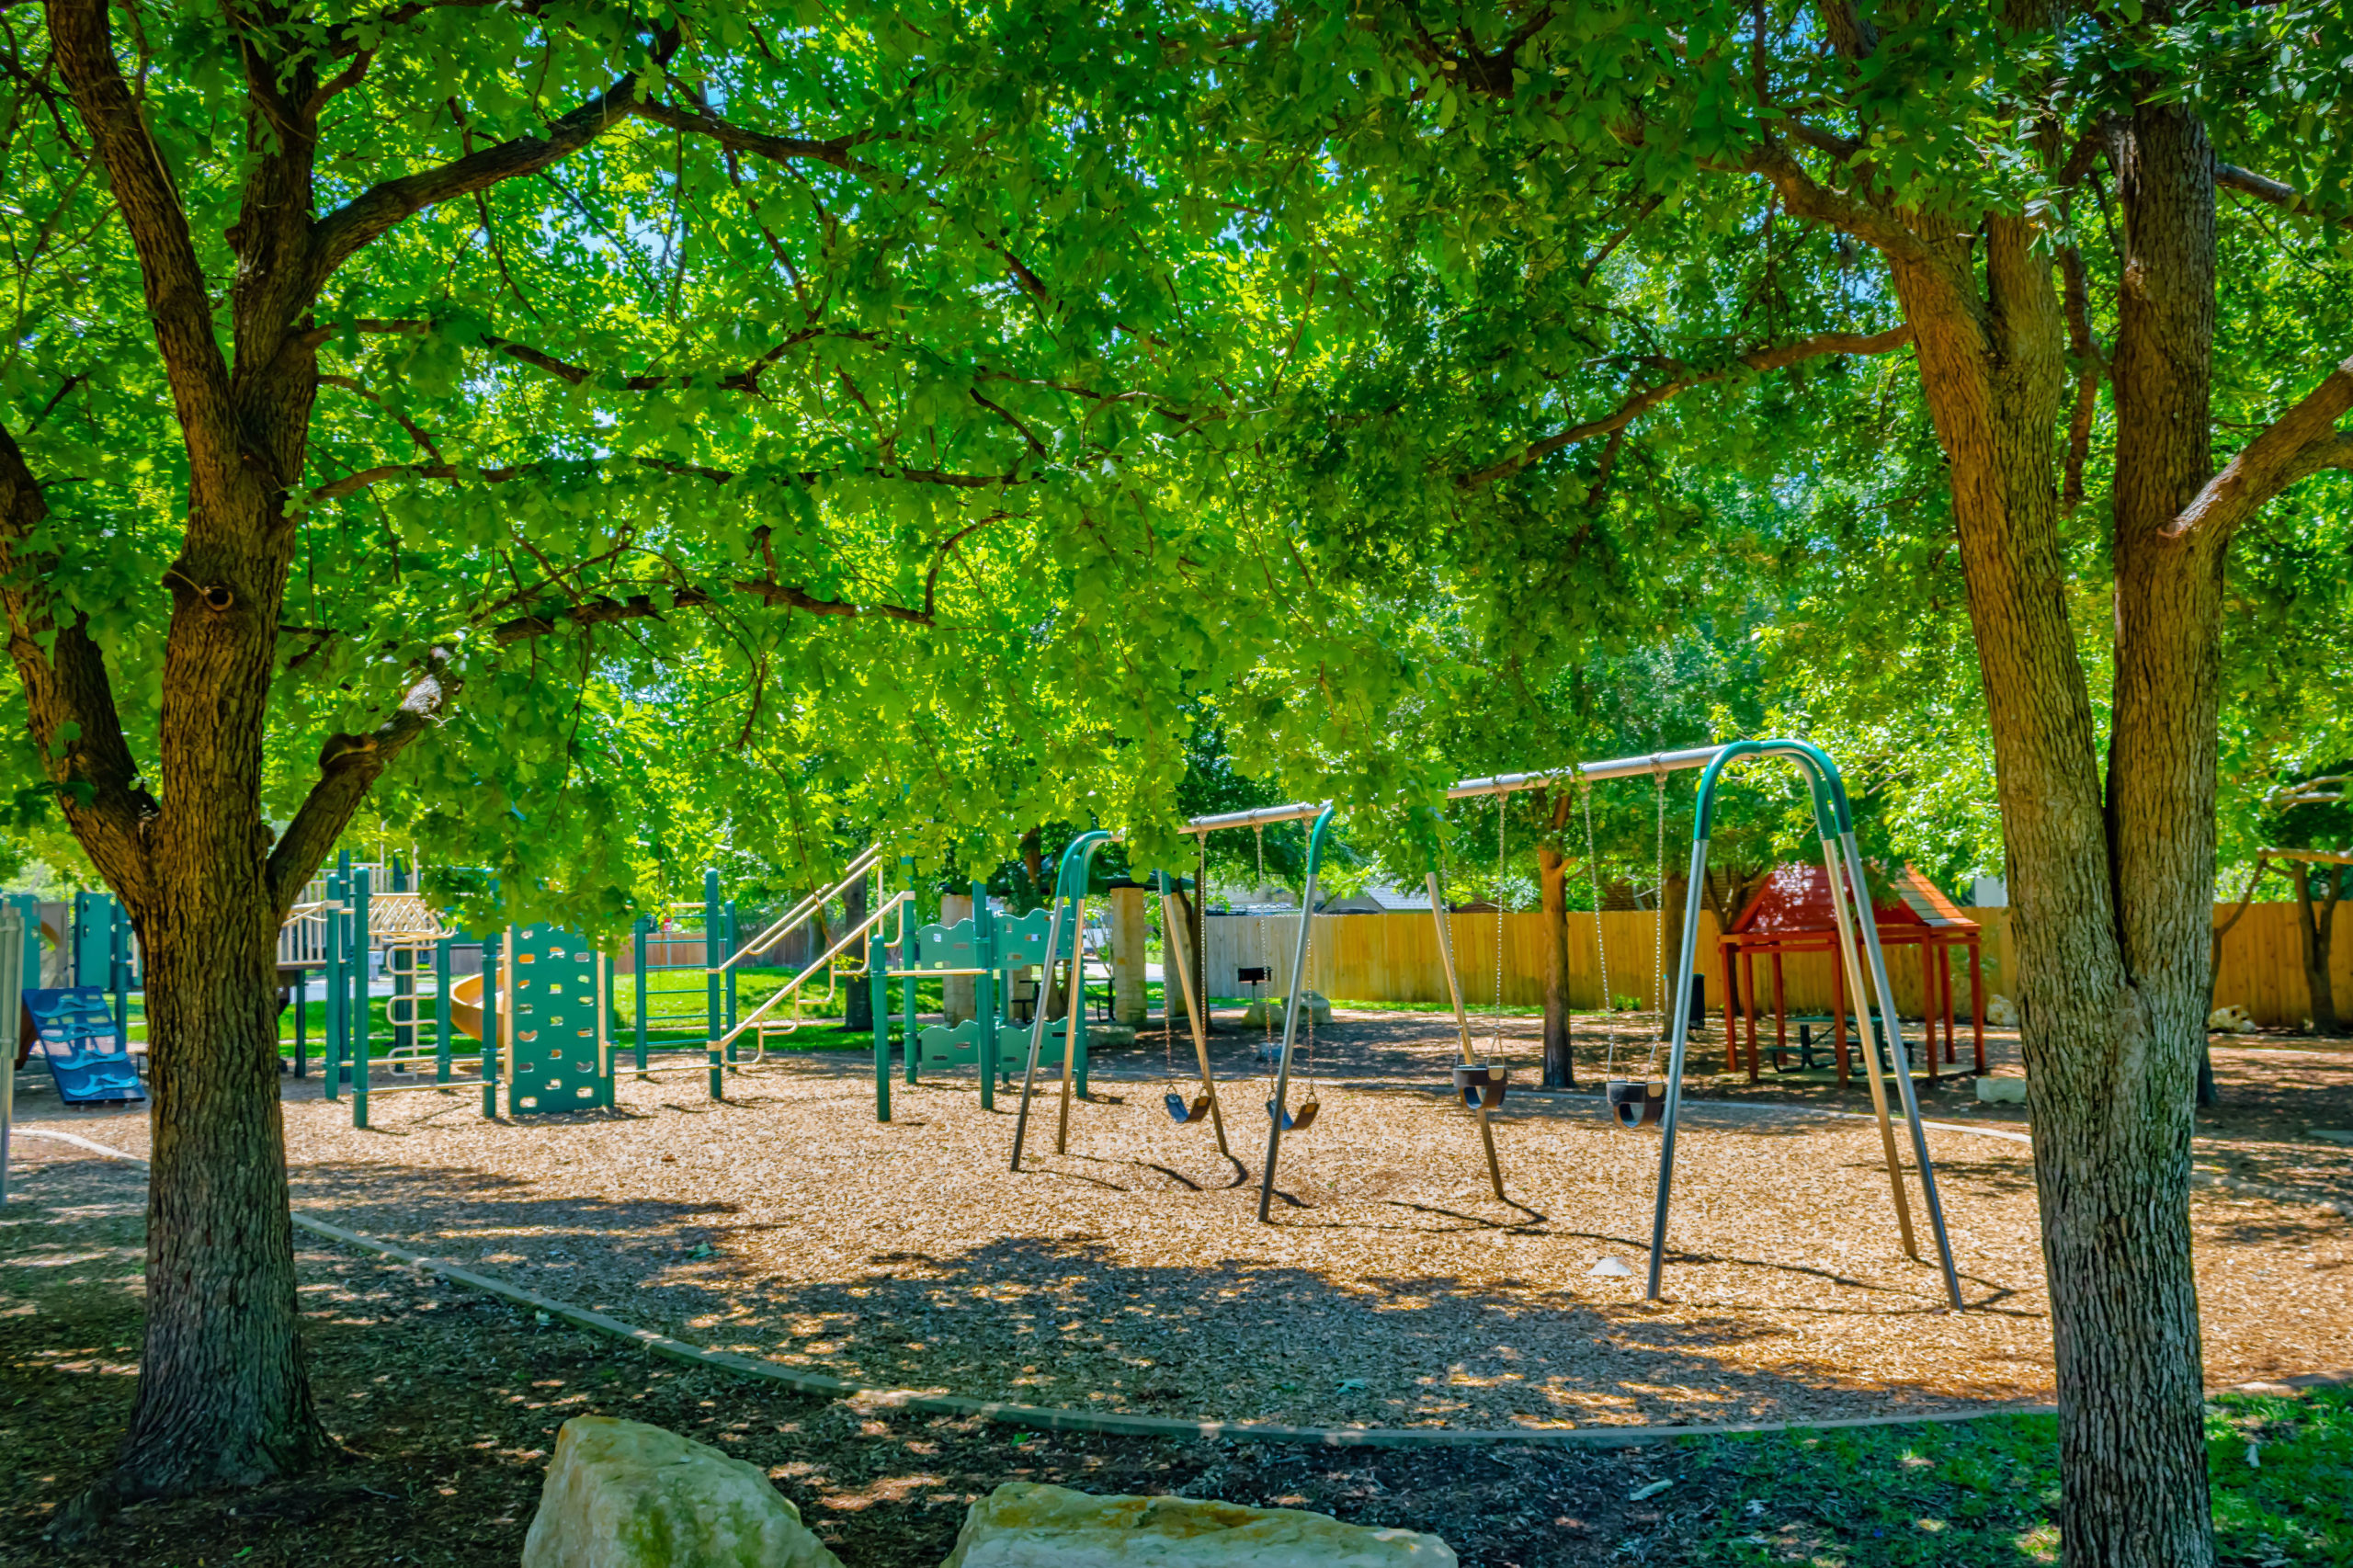 Picture of the swings and playground at Fern Bluff Park.